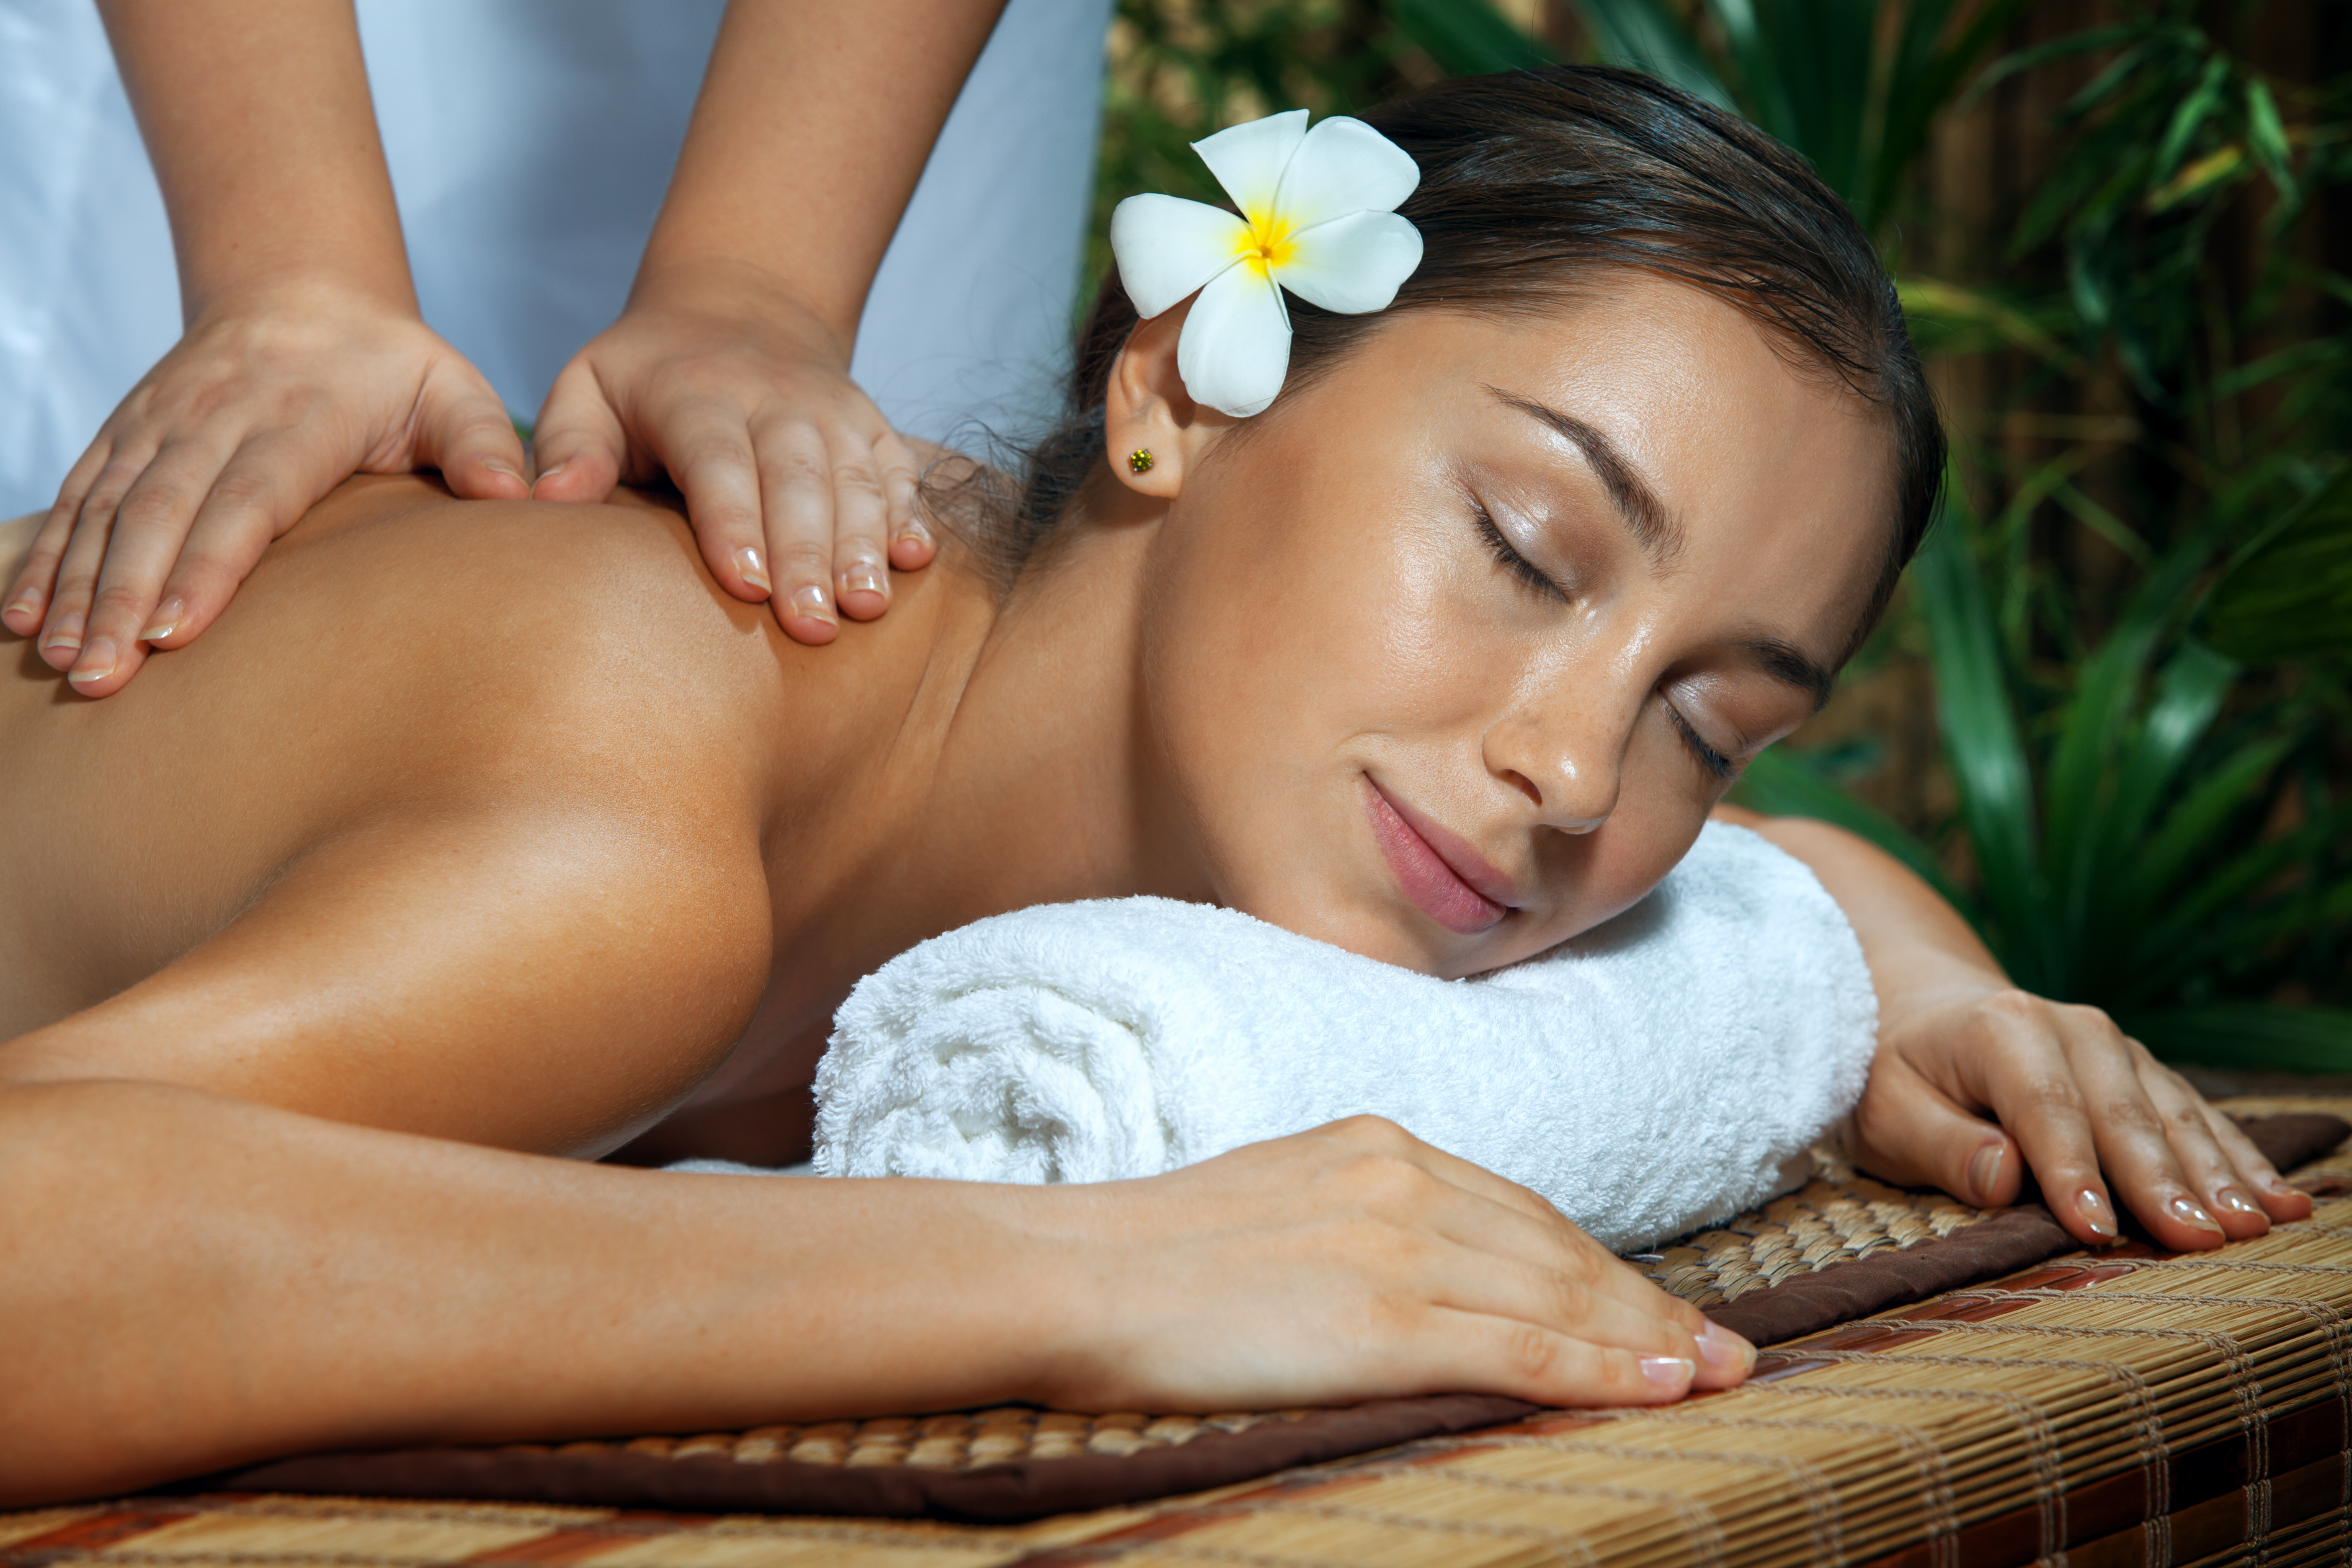 A woman with a flower behind her ear receving a massage.